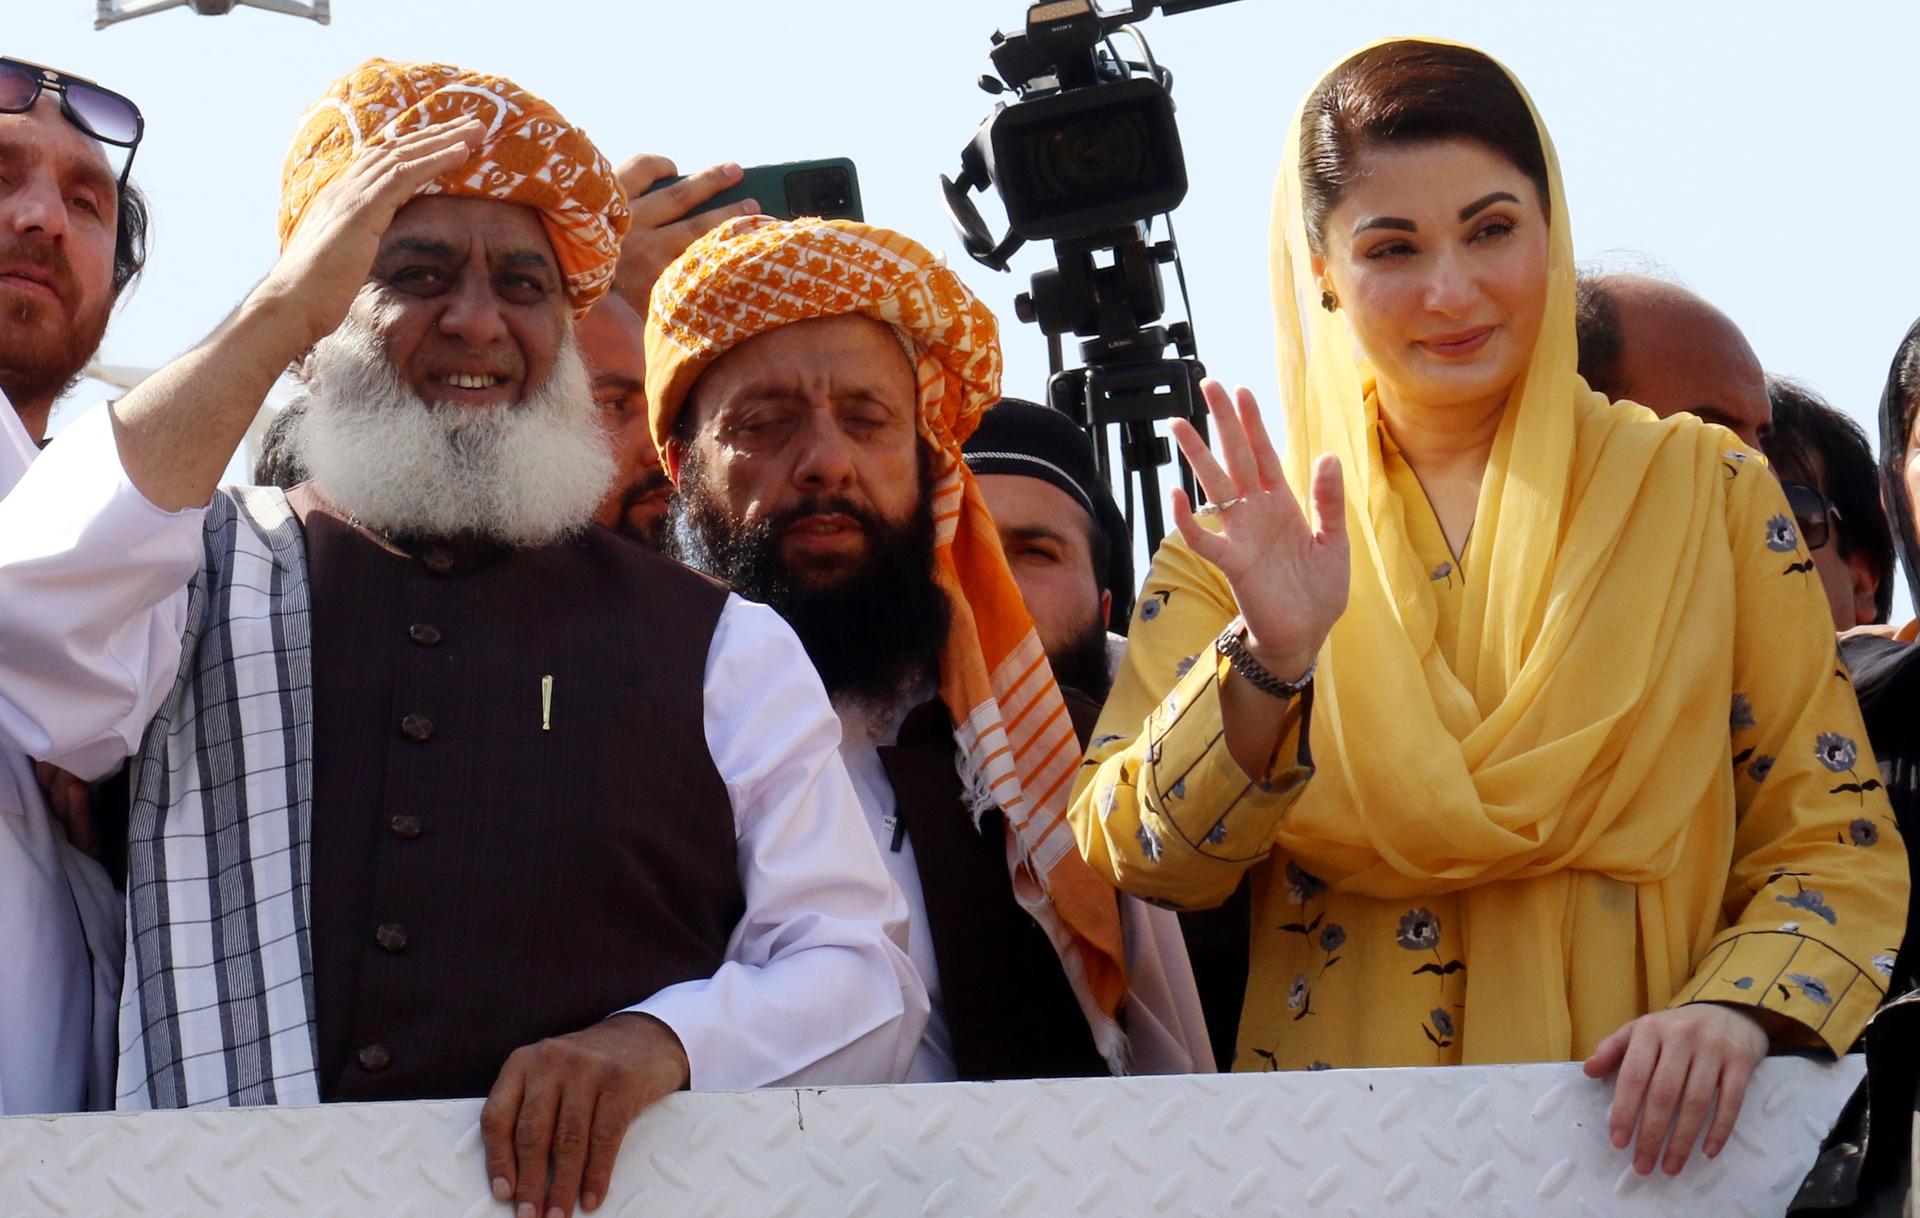 Maryam Nawaz (R) leader of the opposition party Pakistan Muslim League Nawaz (PMLN) and daughter of the former Prime Minister Nawaz Sharif and Maulana Fazal ur Rehman (L), leaders of an alliance of over 10 political parties in ruling government, gather outside the Supreme Court of Pakistan during a protest in Islamabad, Pakistan, 15 May 2023. EFE-EPA/SOHAIL SHAHZAD